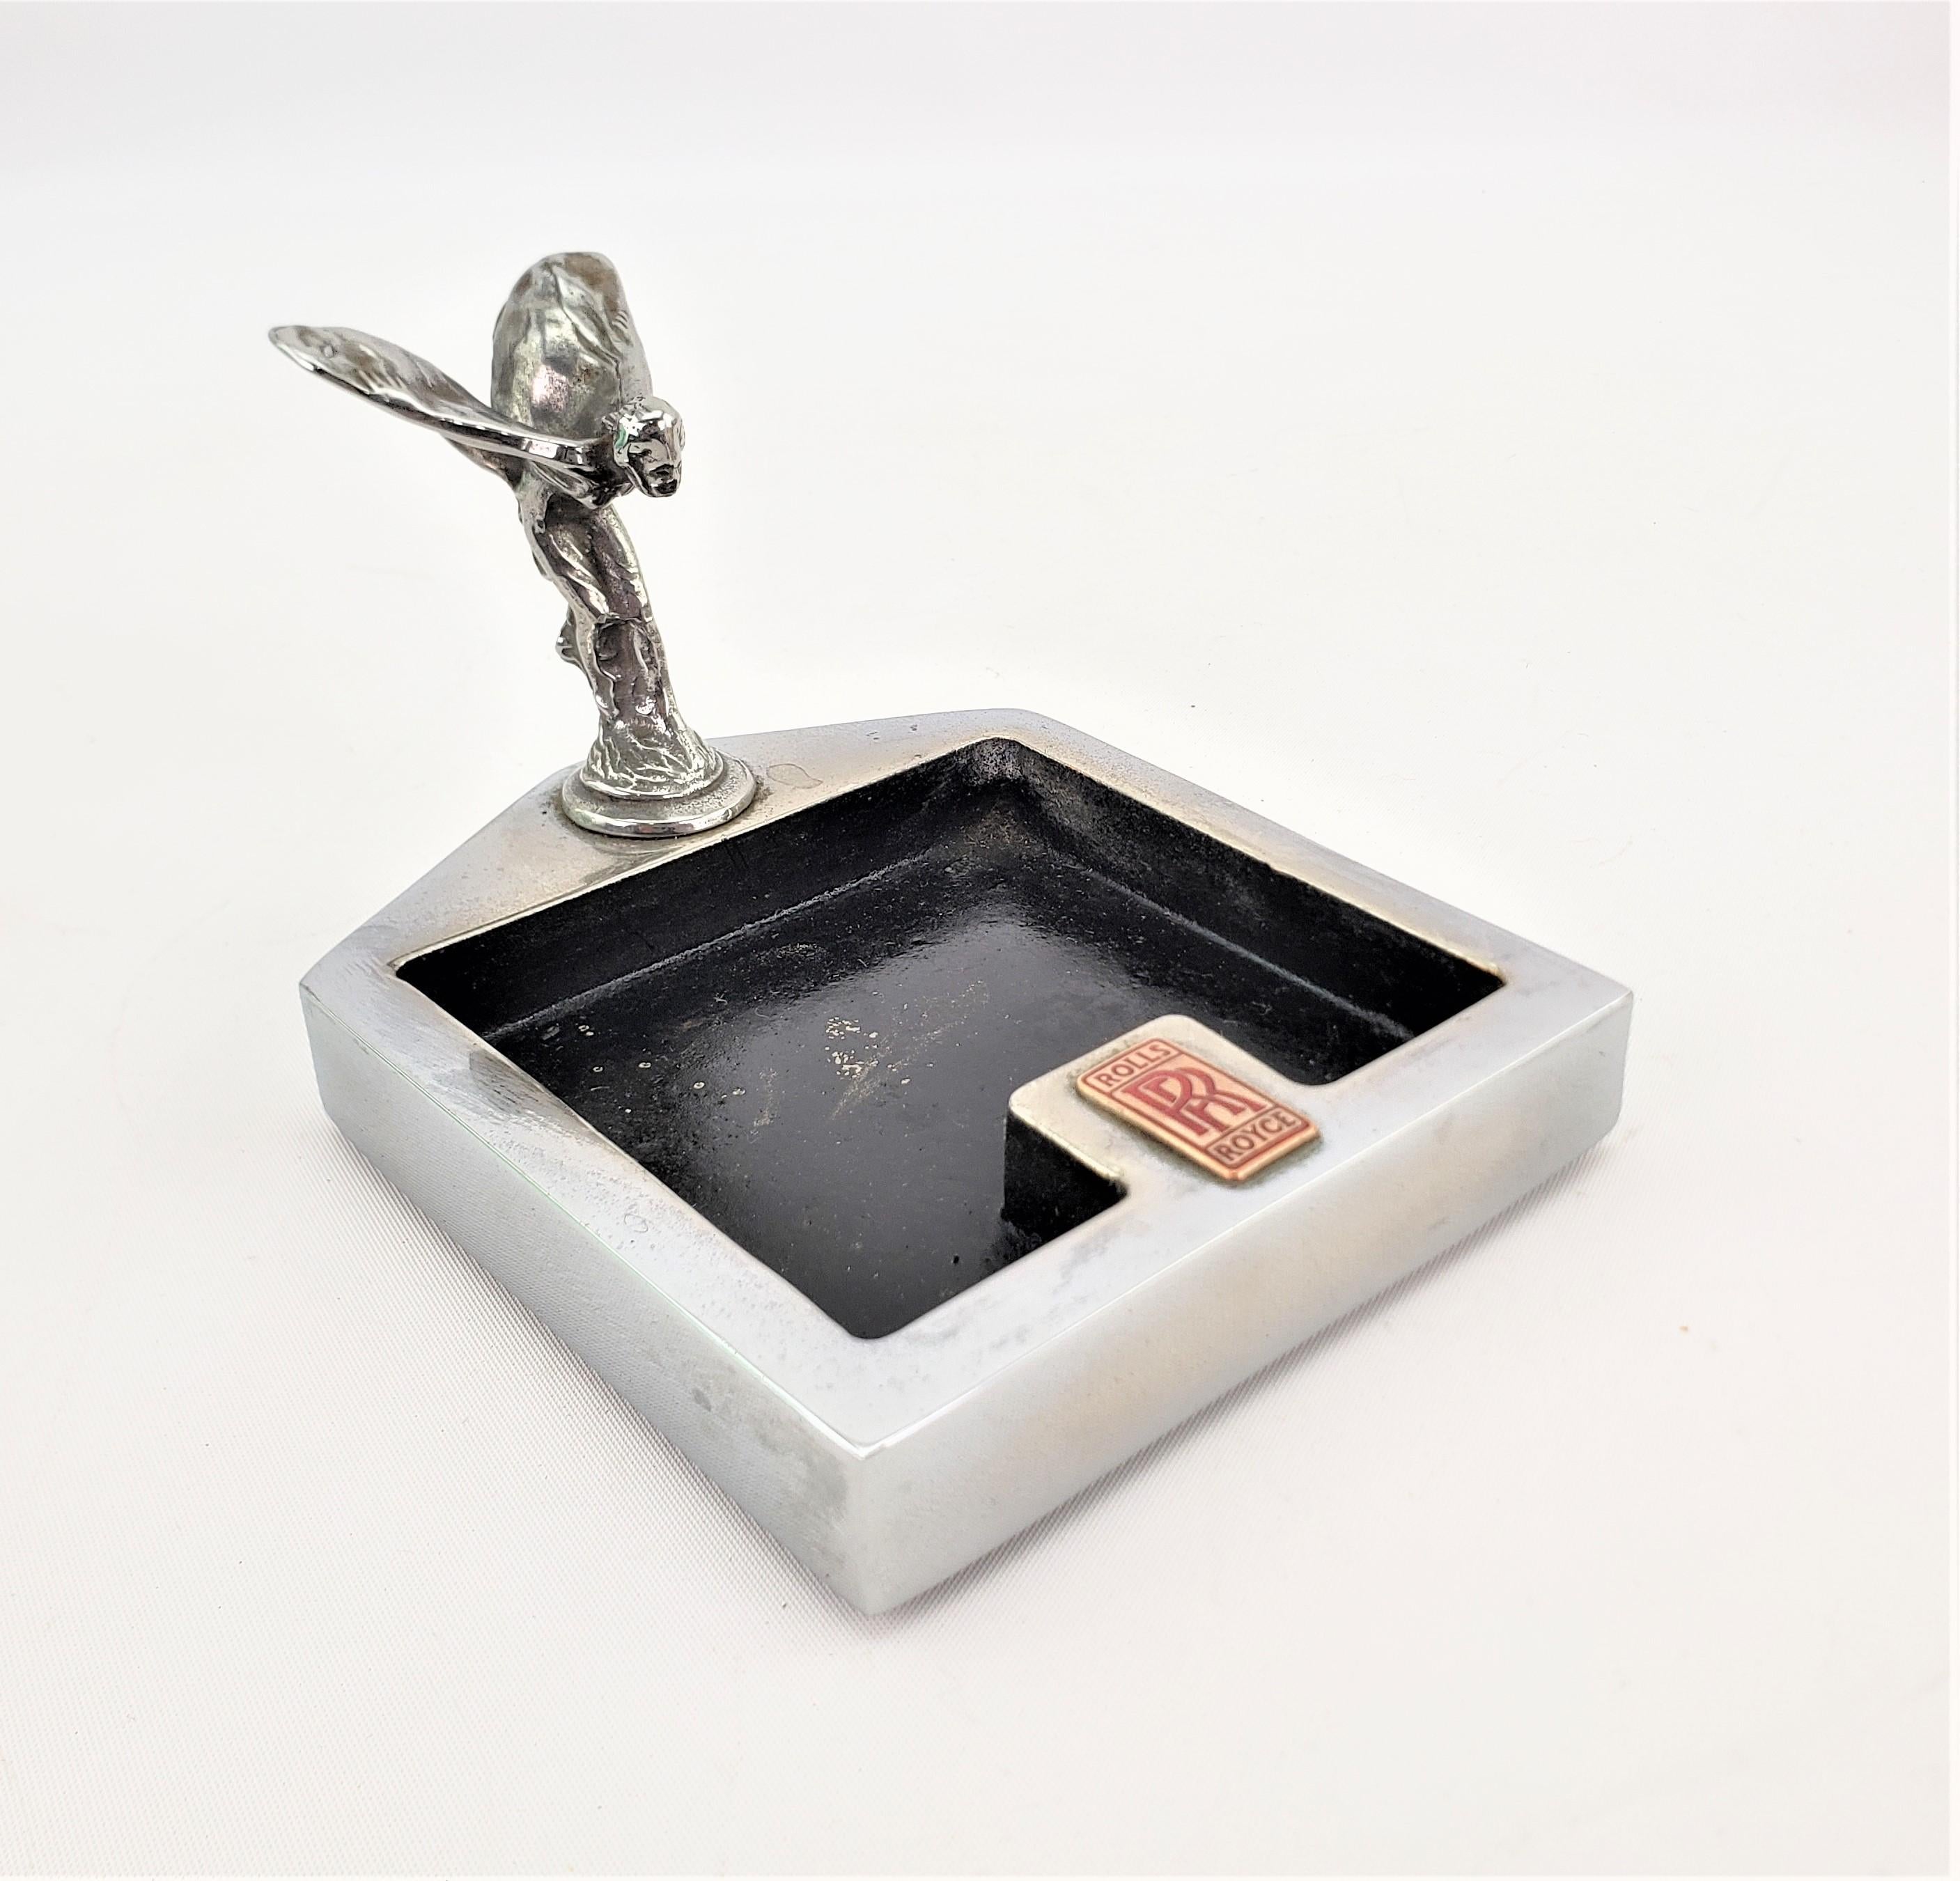 This ashtray or vide poche is unsigned, but presumed to have been made in England either by, or for the Rolls Royce Motor Cars Company in approximately 1920 in the period Art Deco style. The tray is cast metal which has been nickel plated and